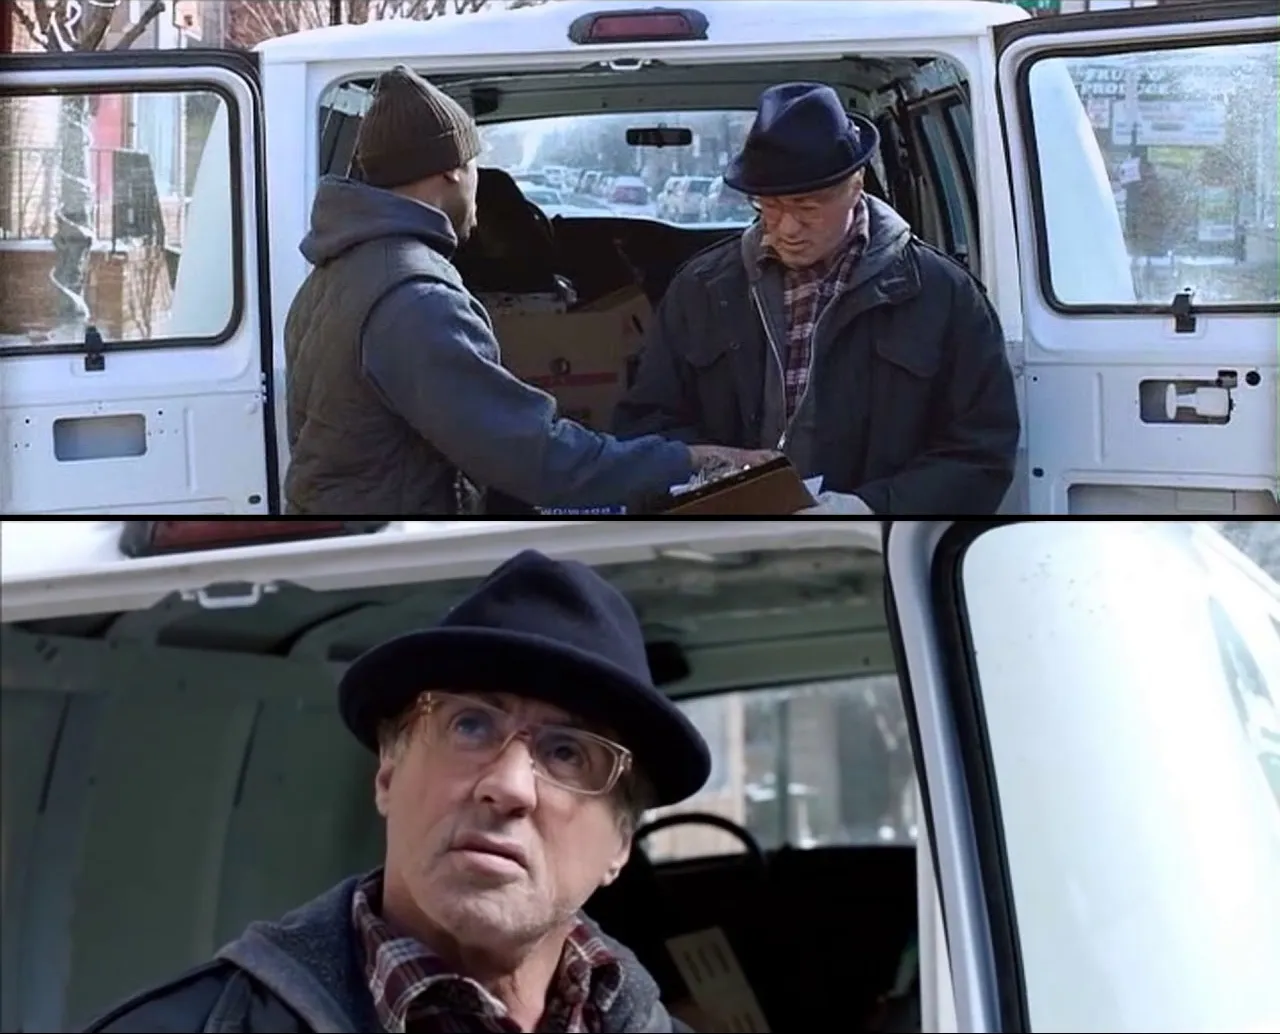 The Cloud scene from CREED (one of the funniest scenes over 7 movies